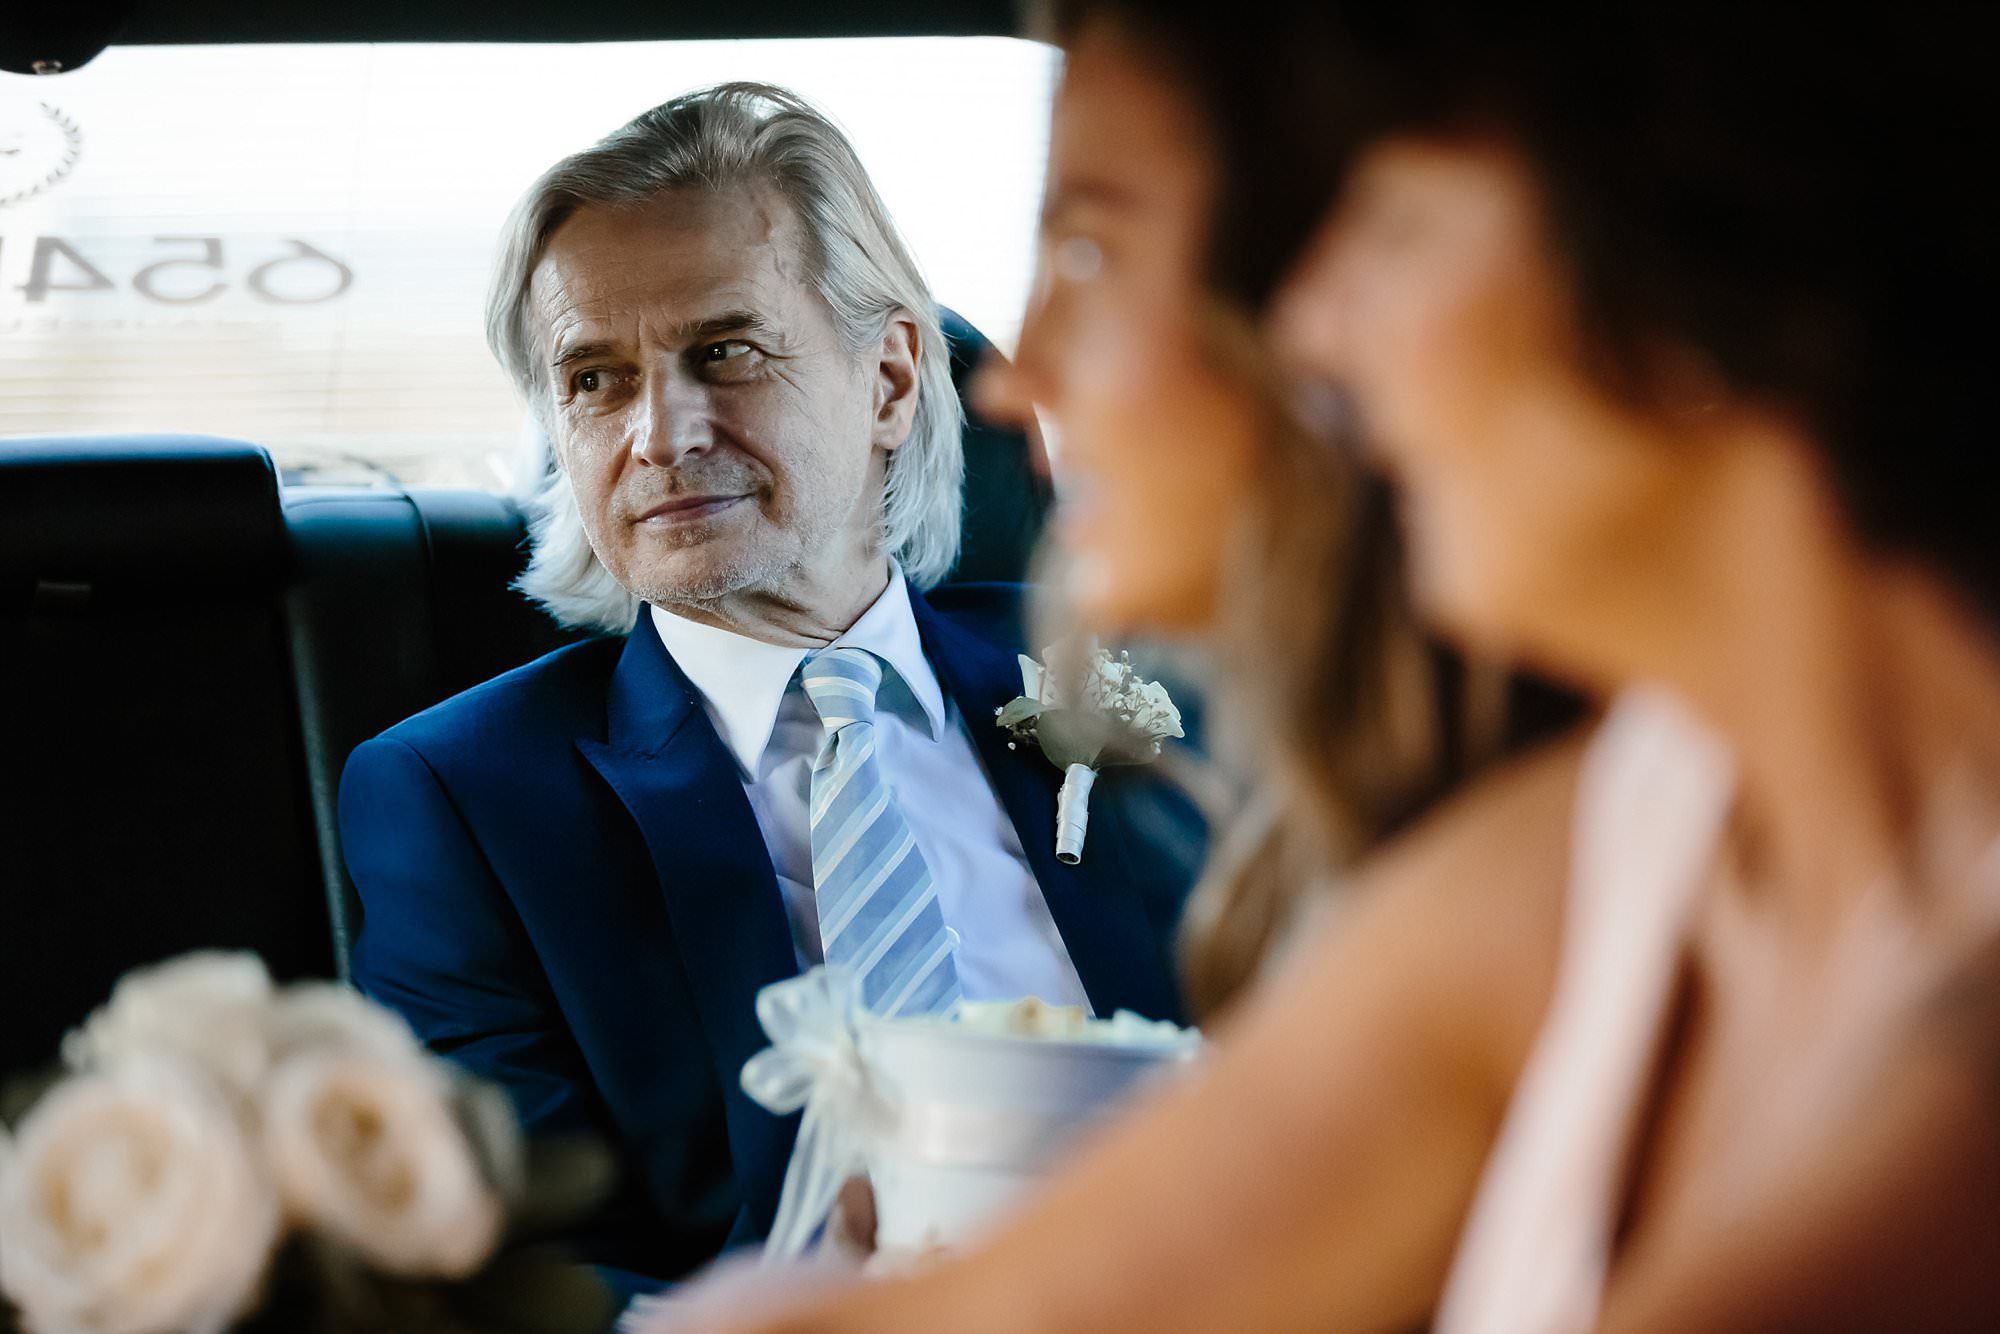 Father of the bride wearing blue suit in a limo